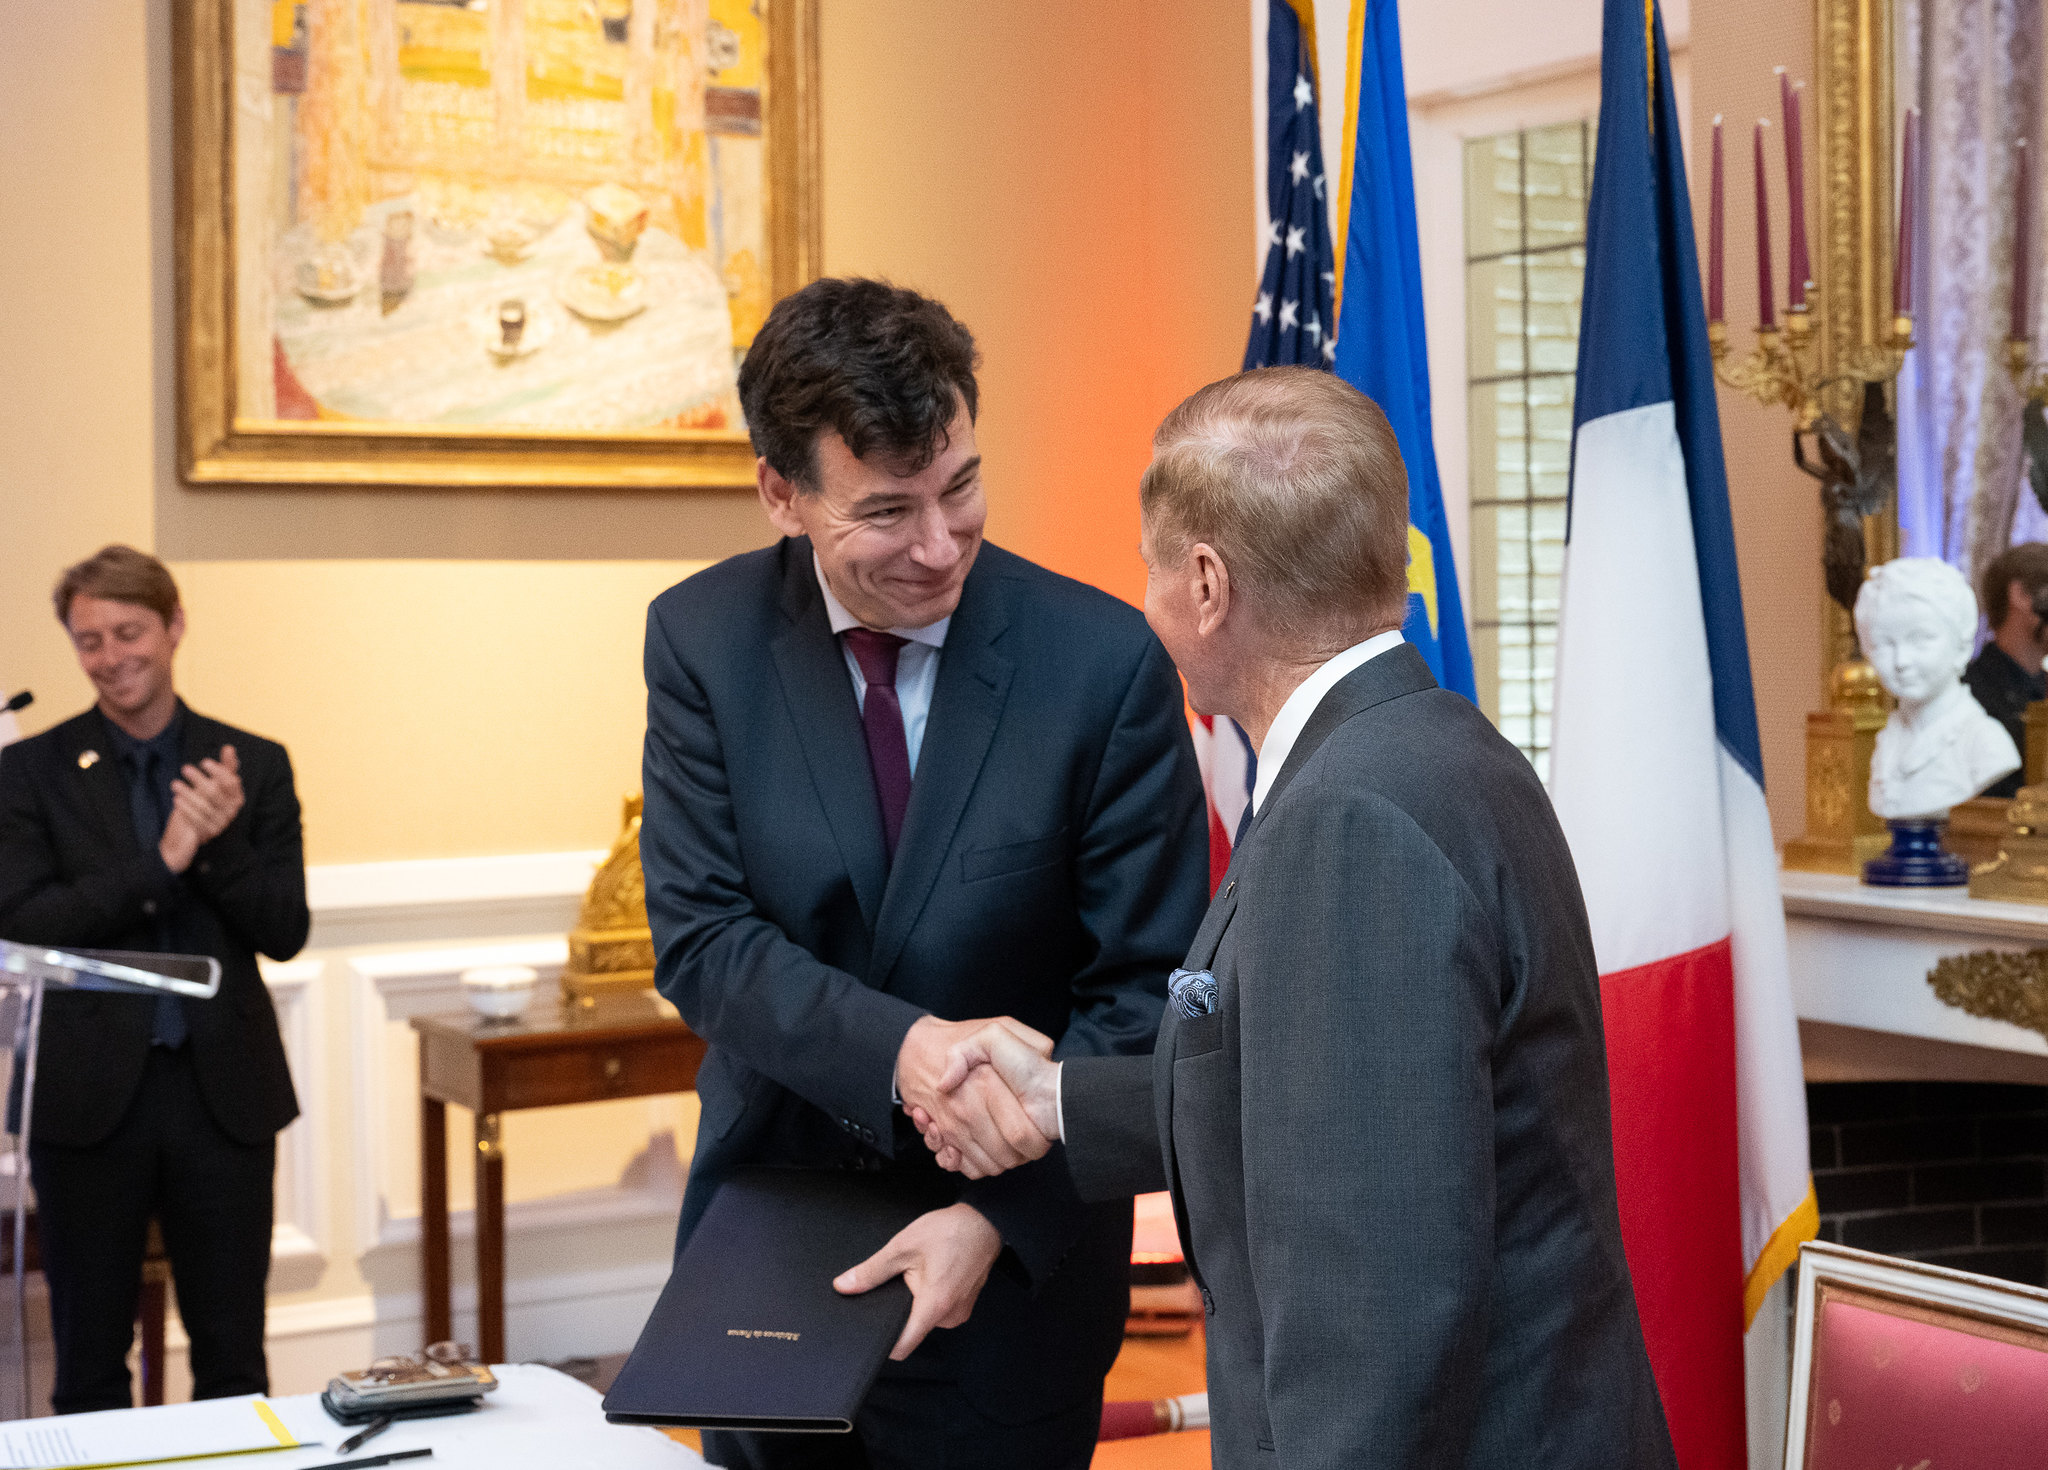 NASA Administrator Bill Nelson, right, and President of the Centre National d’Etudes Spatiales (CNES) Dr. Philippe Baptiste shake hands following the signing the Artemis Accords Tuesday, June 7, 2022, at the French Ambassador’s Residence in Washington.